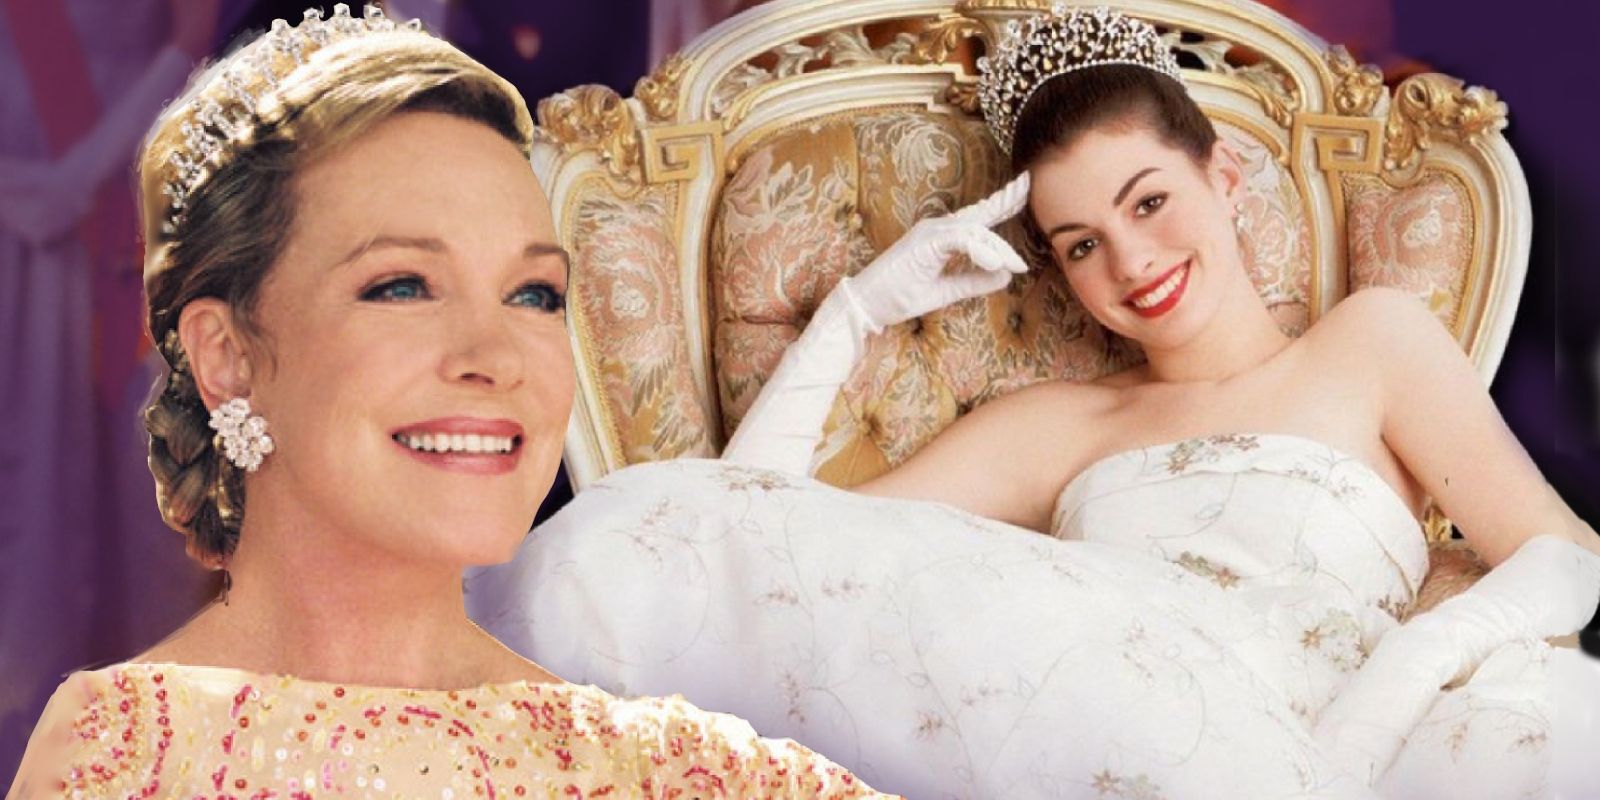 The Princess Diaries'  Mia posing in throne alongside Julie Andrew’s Queen Clarisse smiling.